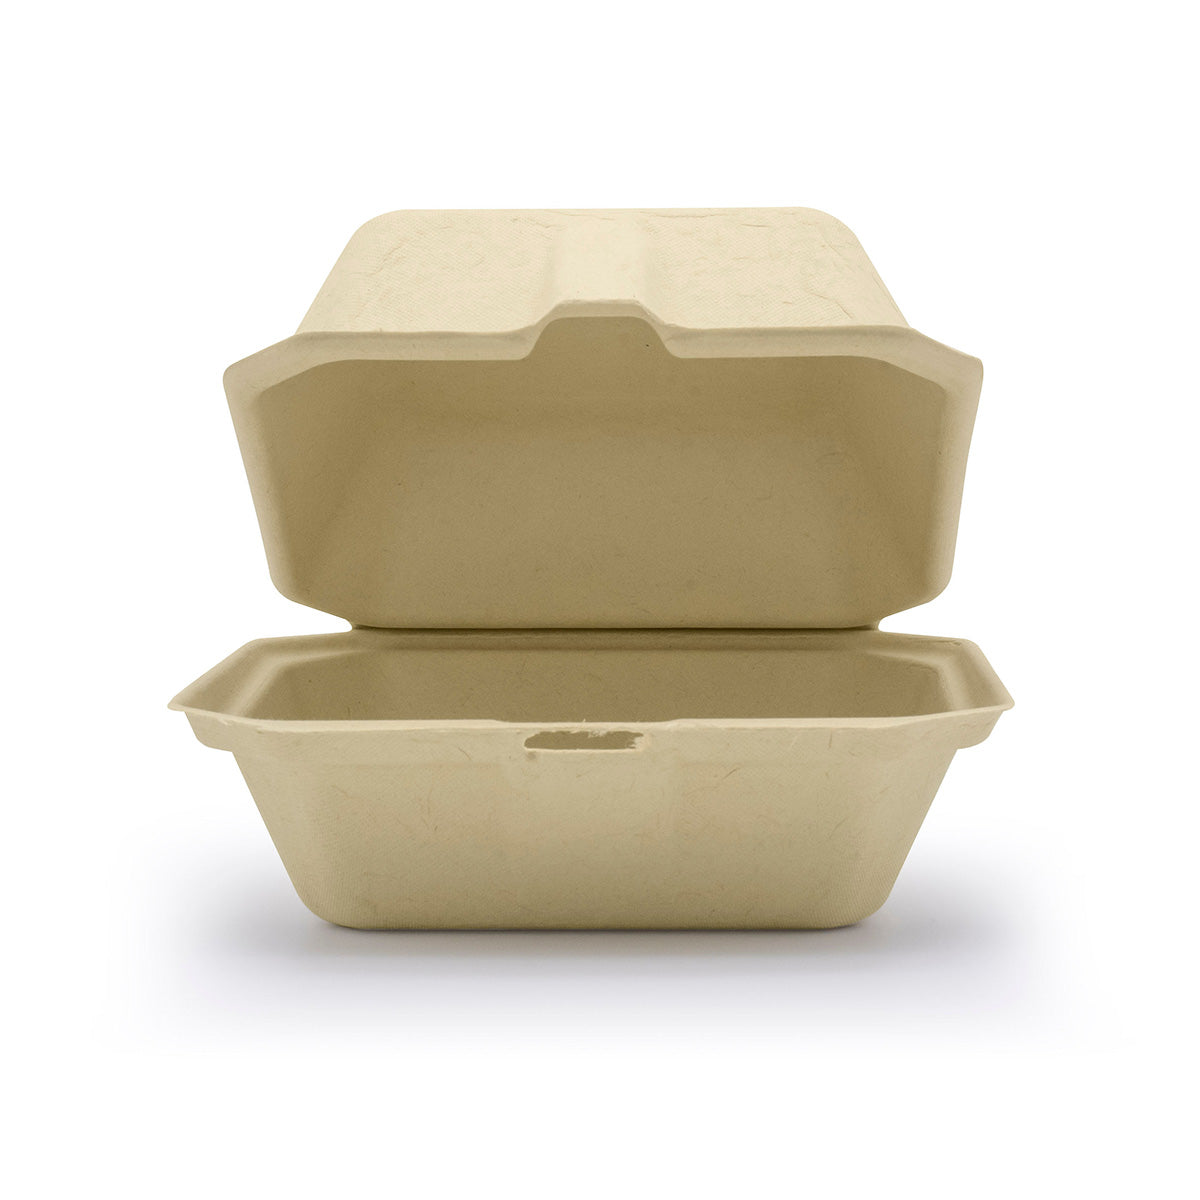 6" x 6" Compostable Clamshell | 1 Compartment | No PFAS Added (Pack of 100)